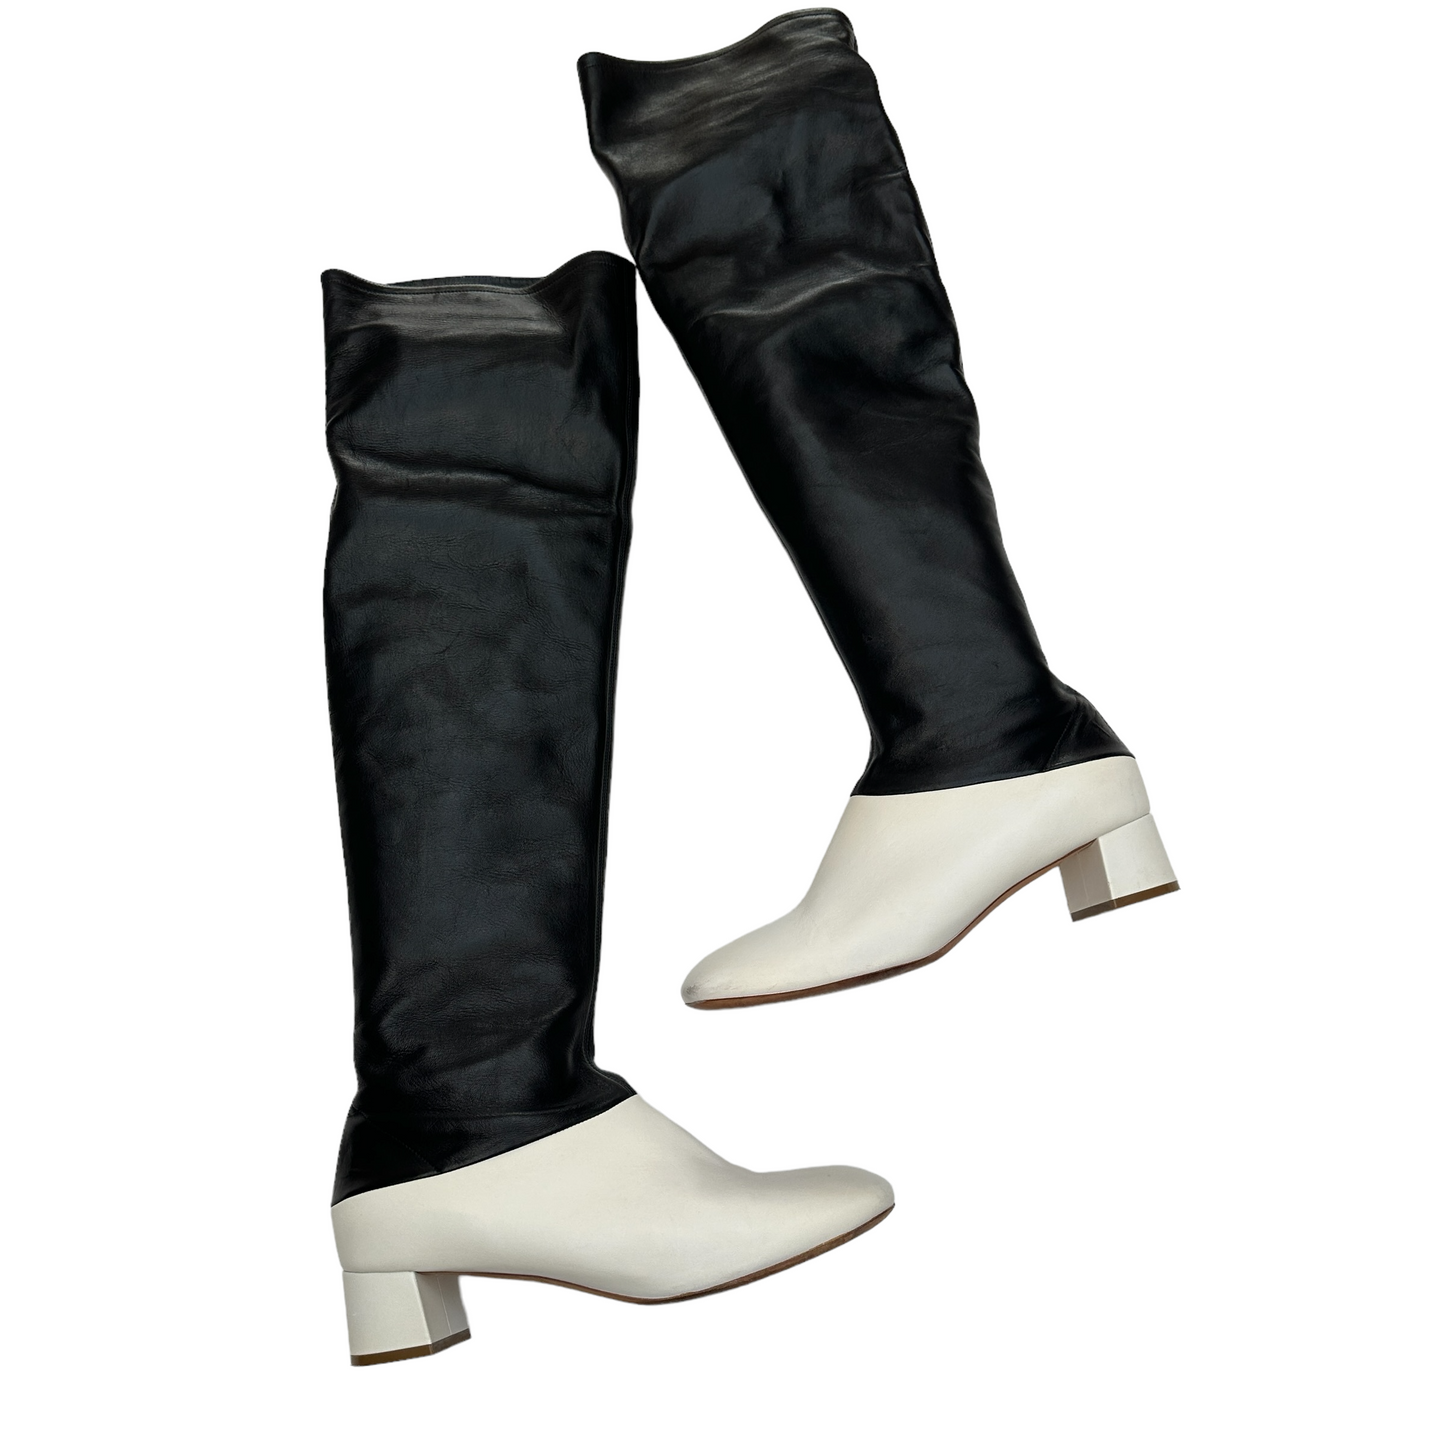 Black & White Tall Boots - 10